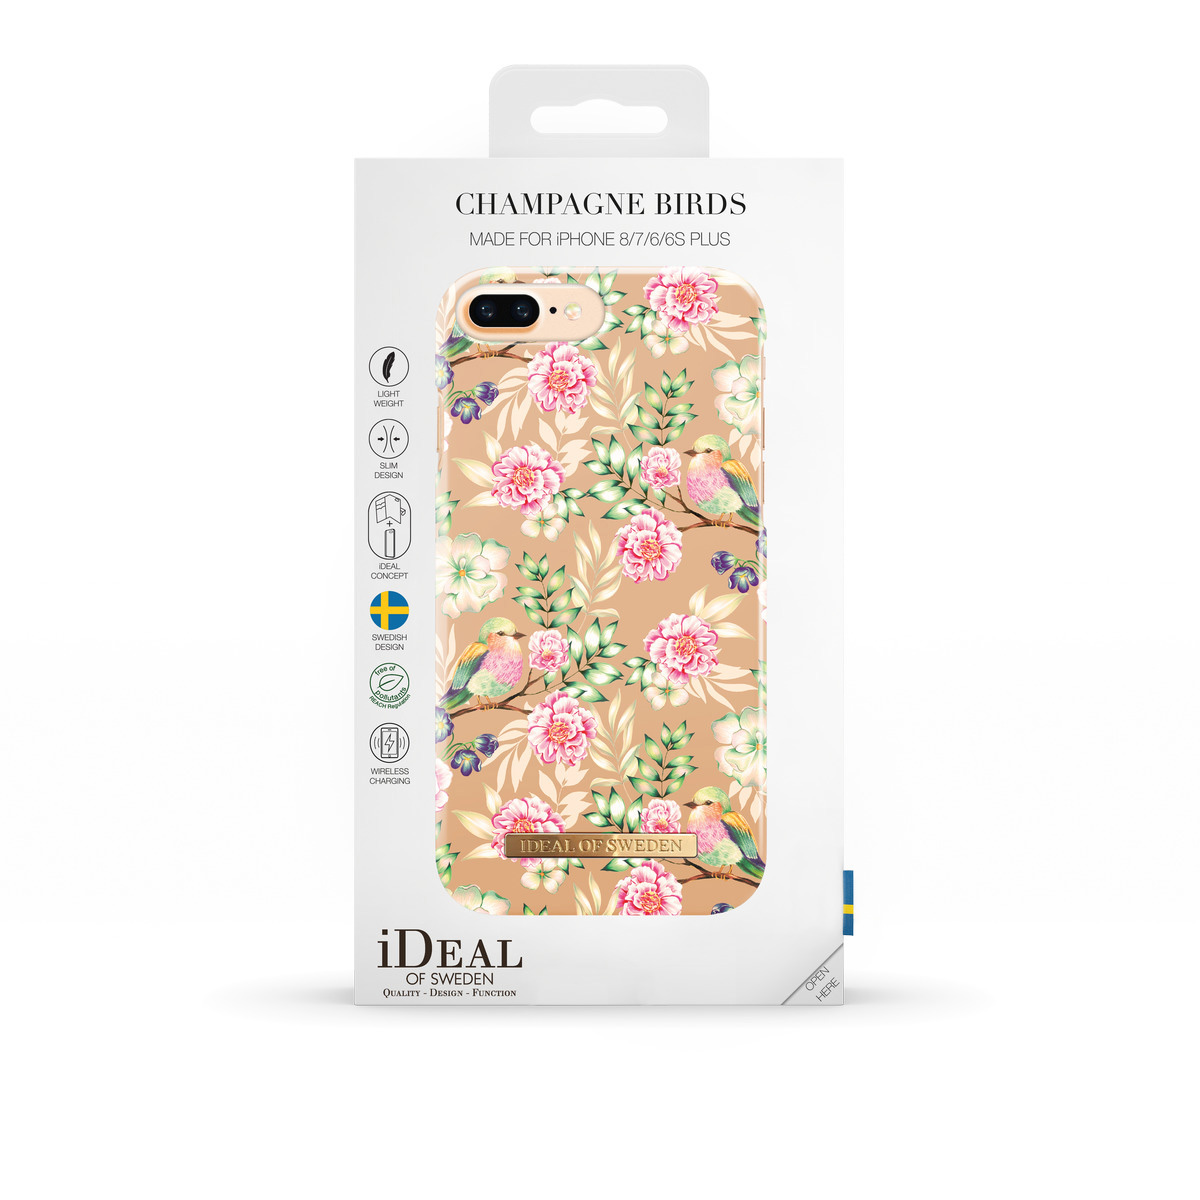 IDEAL OF SWEDEN ,iPhone Plus, 6 Birds Apple, iPhone Fashion, 7 iPhone Champagne Plus Backcover, 8 Plus